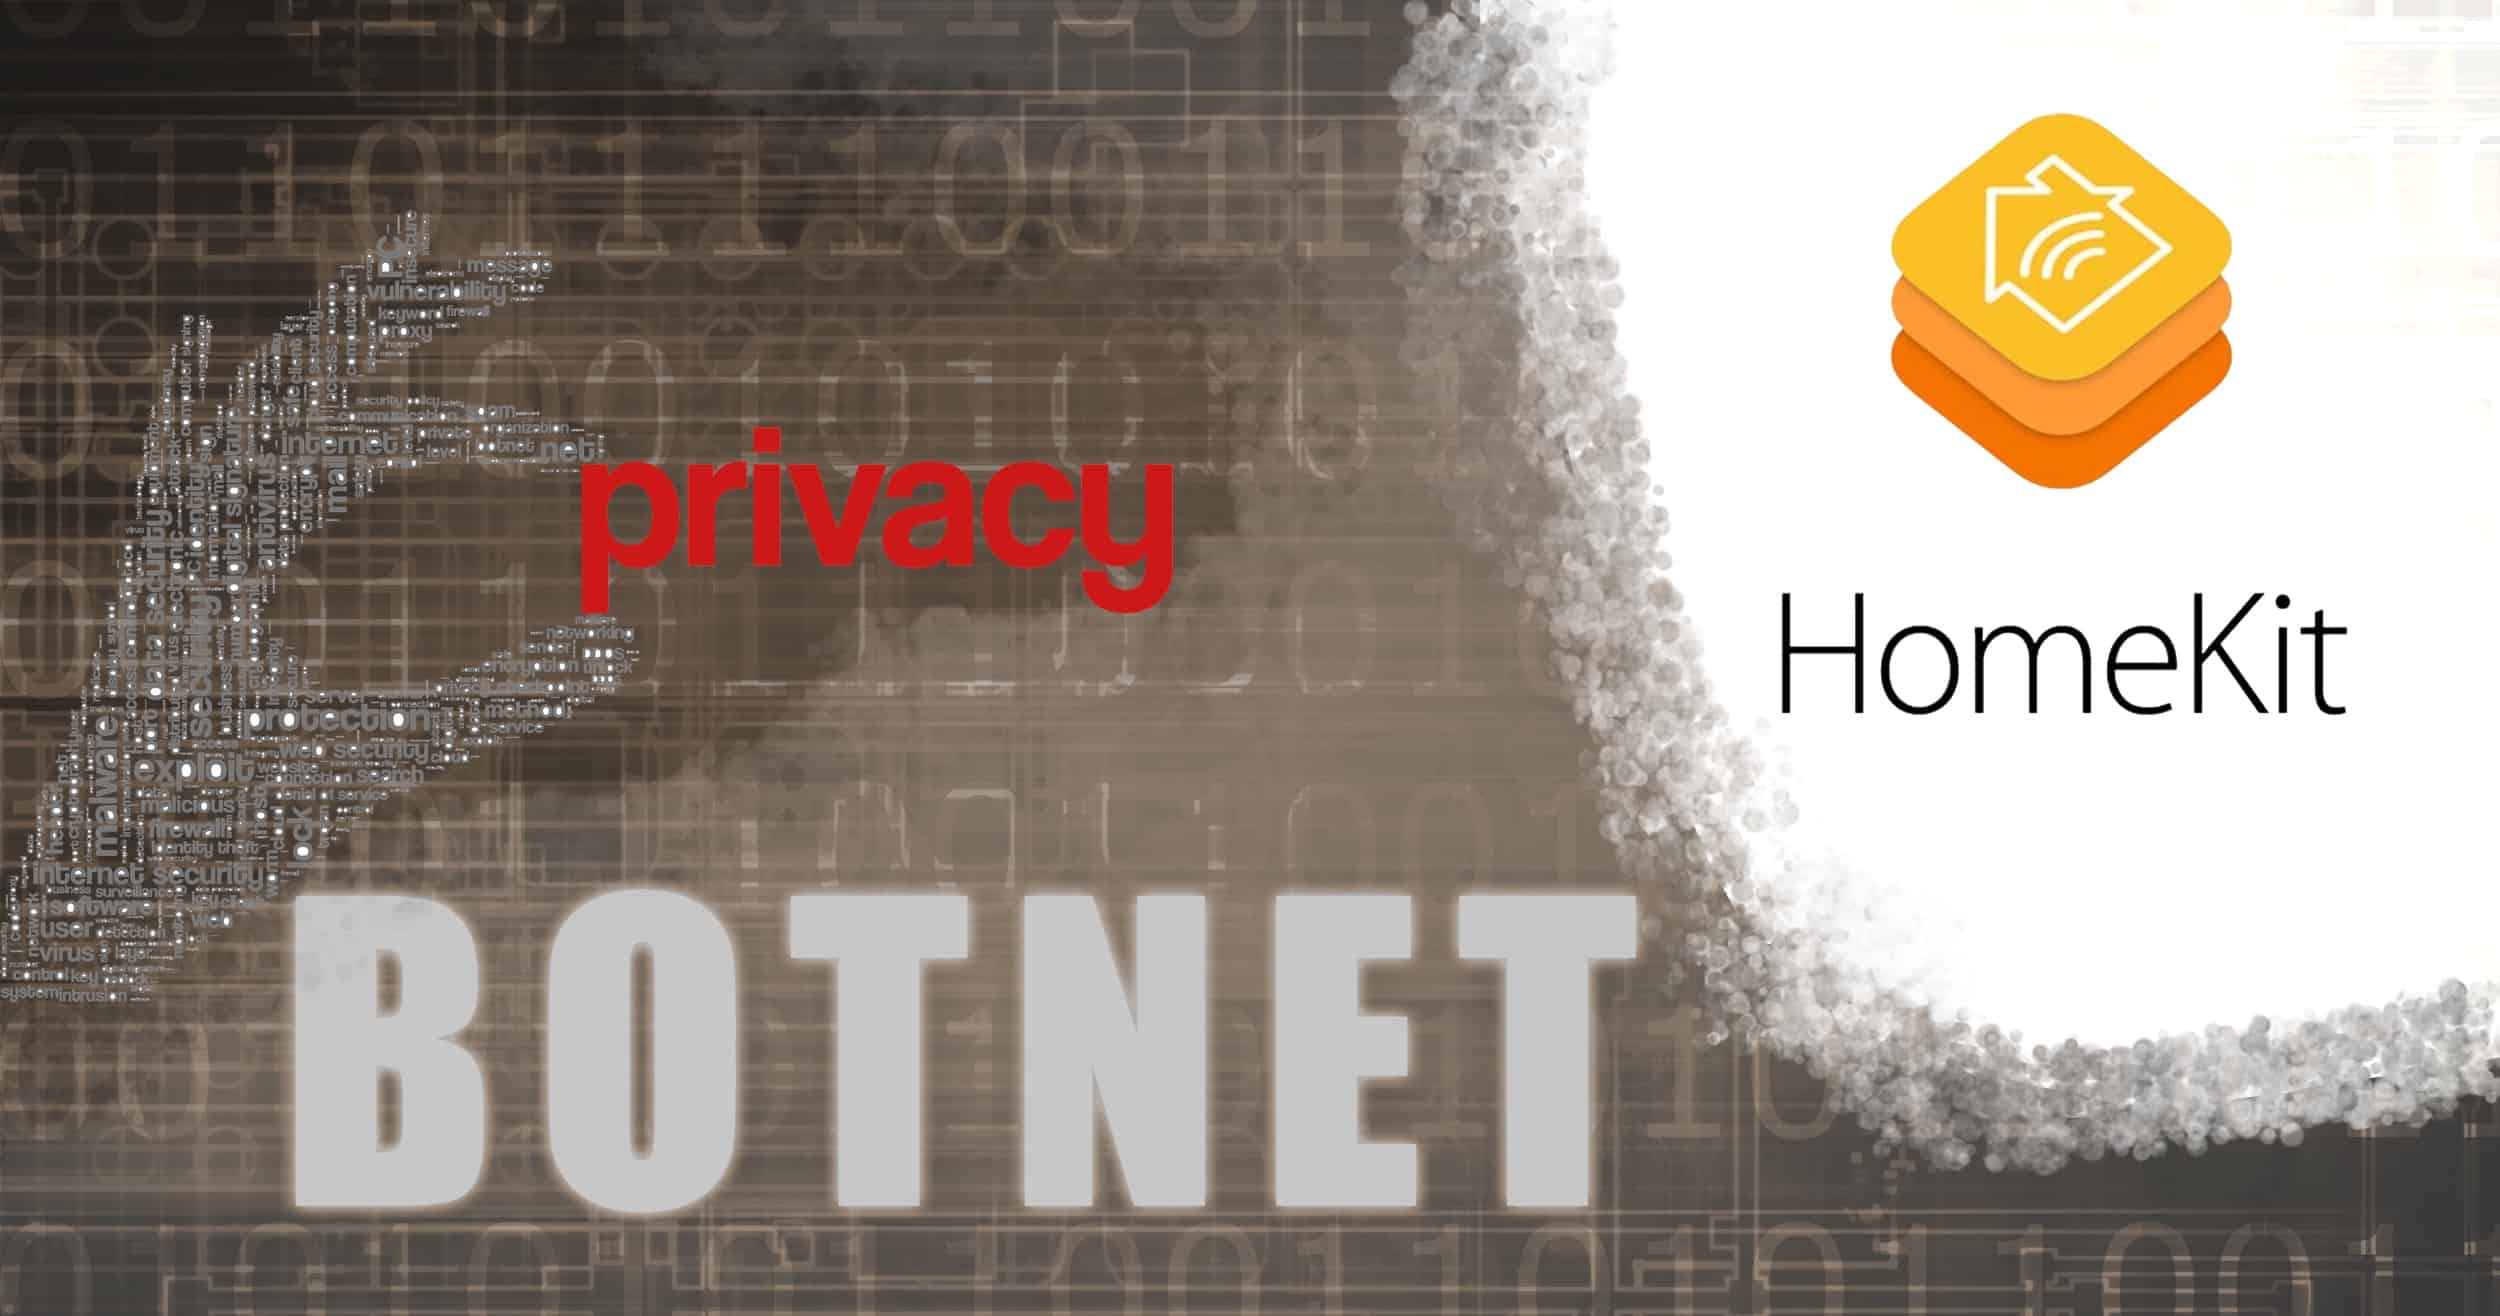 Apple’s HomeKit Security vs. ioT Botnets – There’s Only So Much Apple Can Do